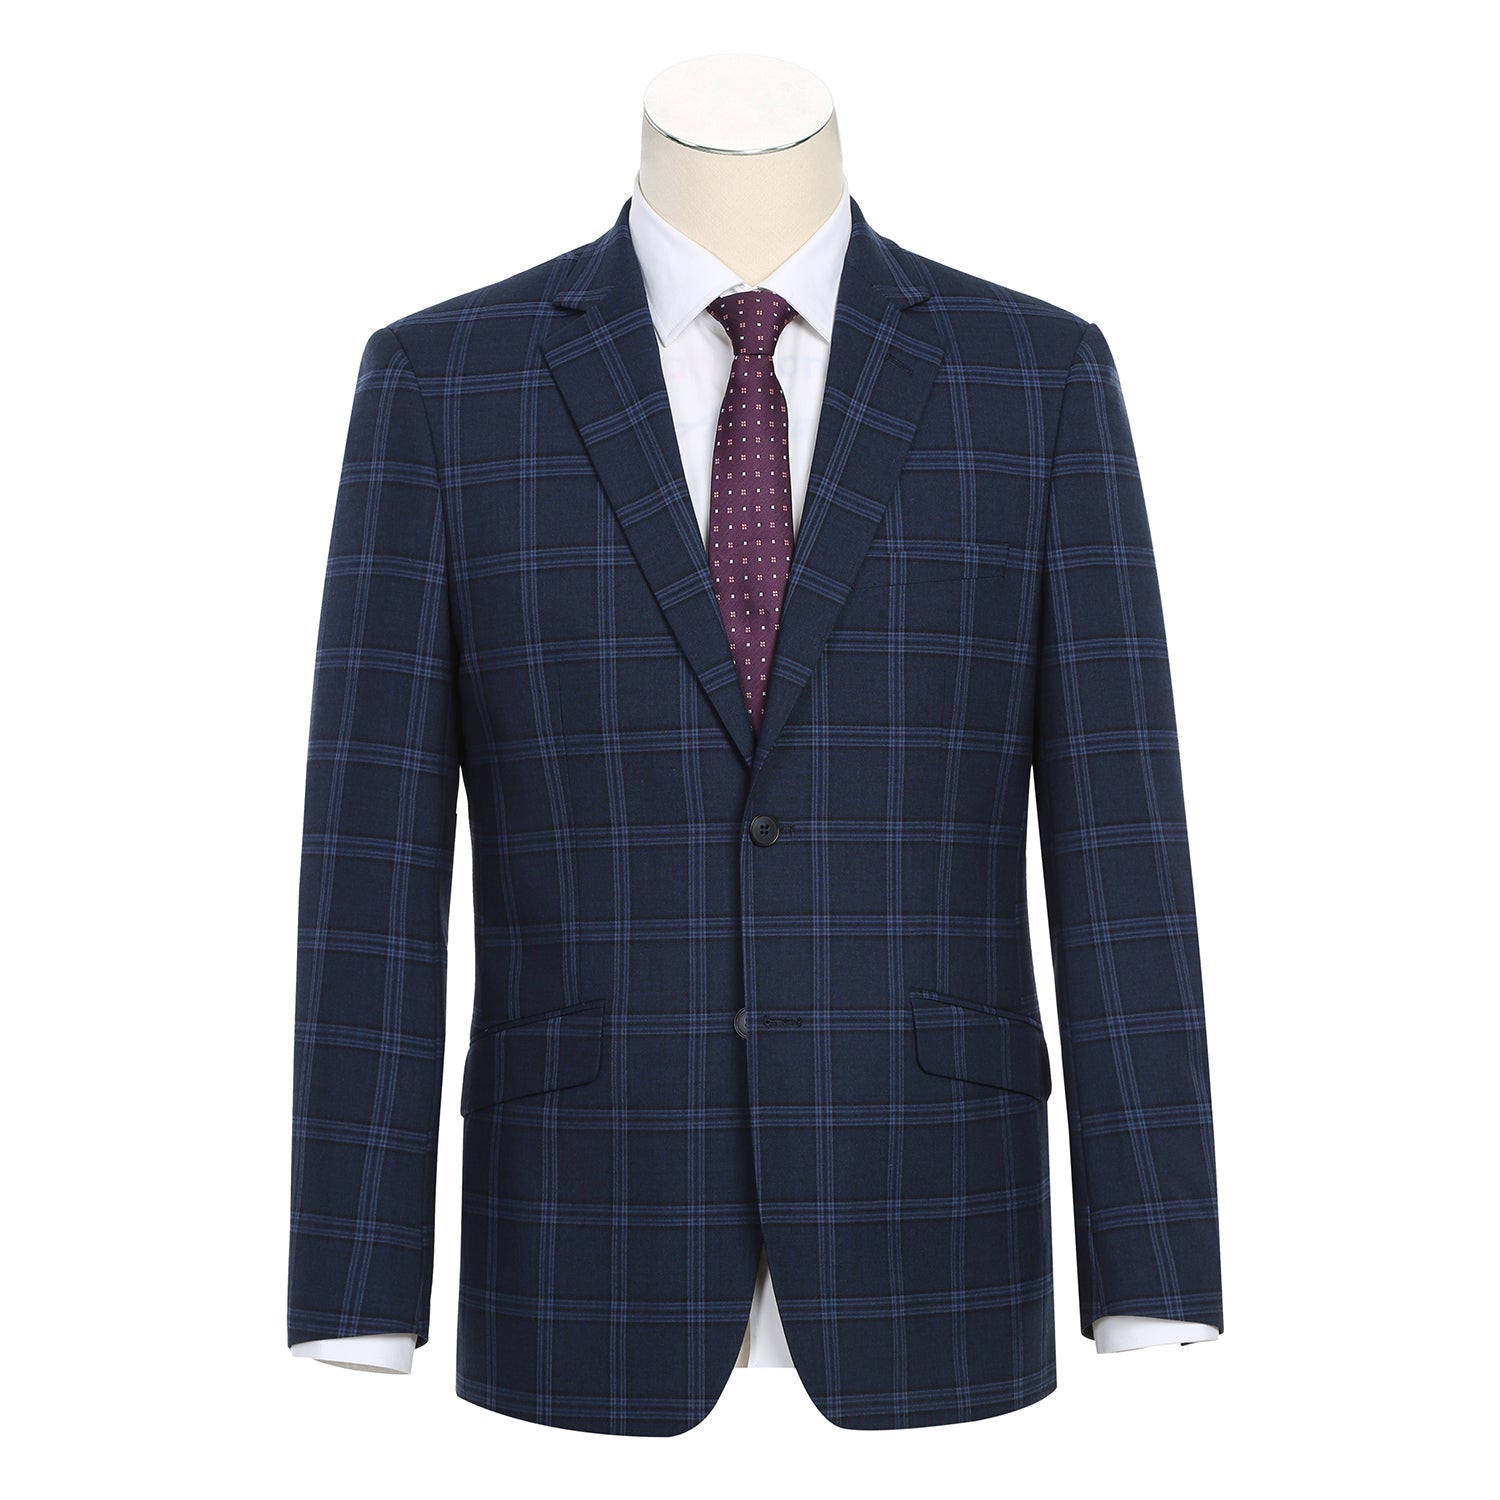 Men’s Slim Fit Checked Suits 1